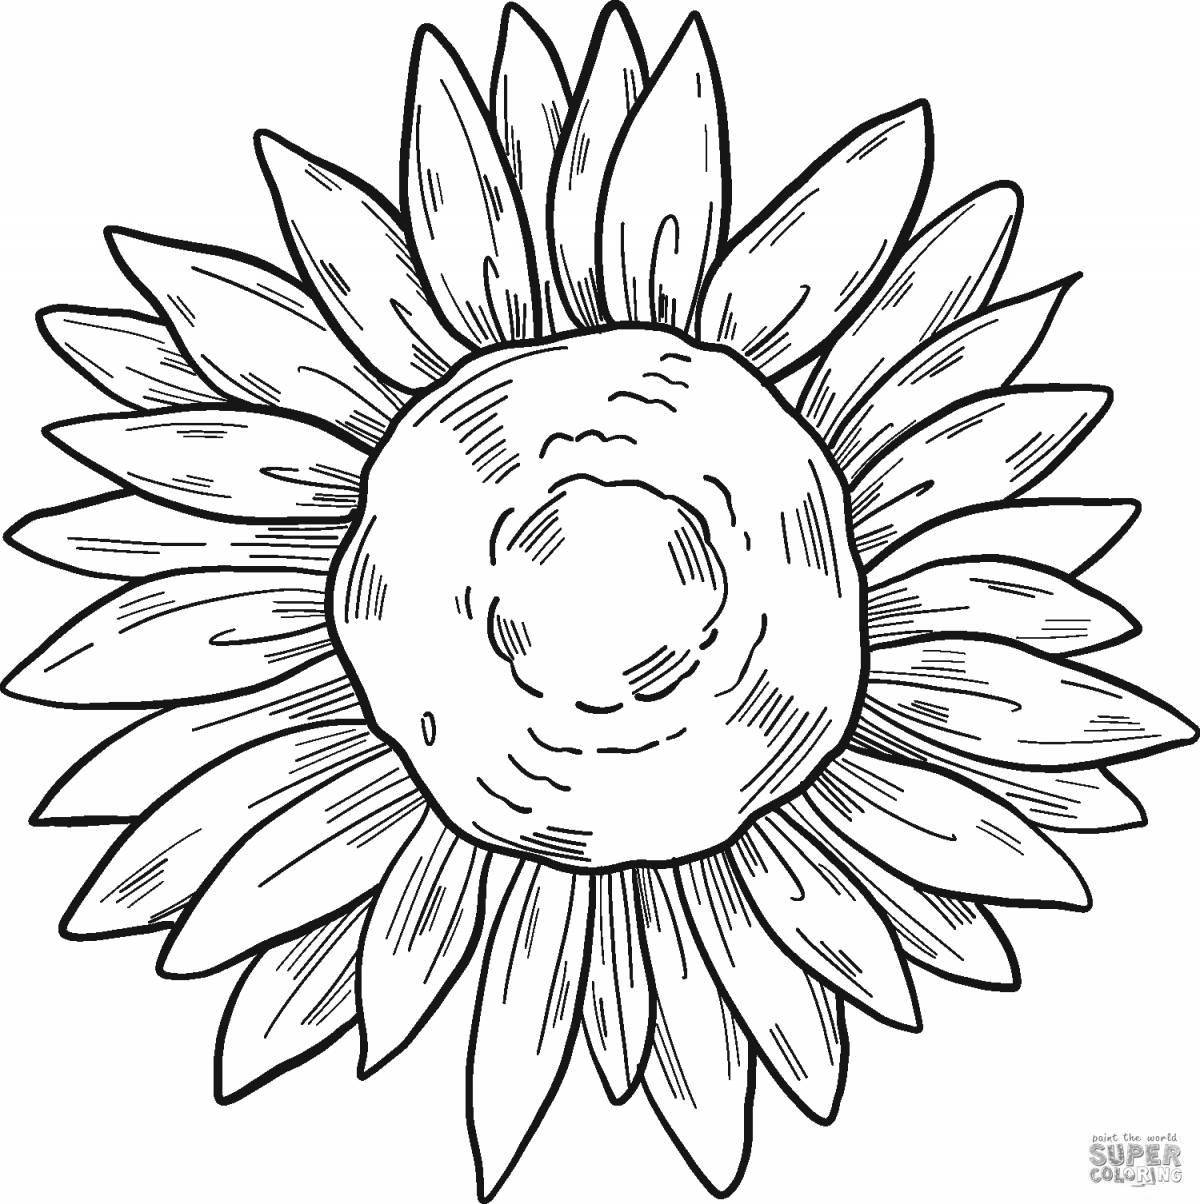 Coloring book happy sunflower for preschoolers 2-3 years old